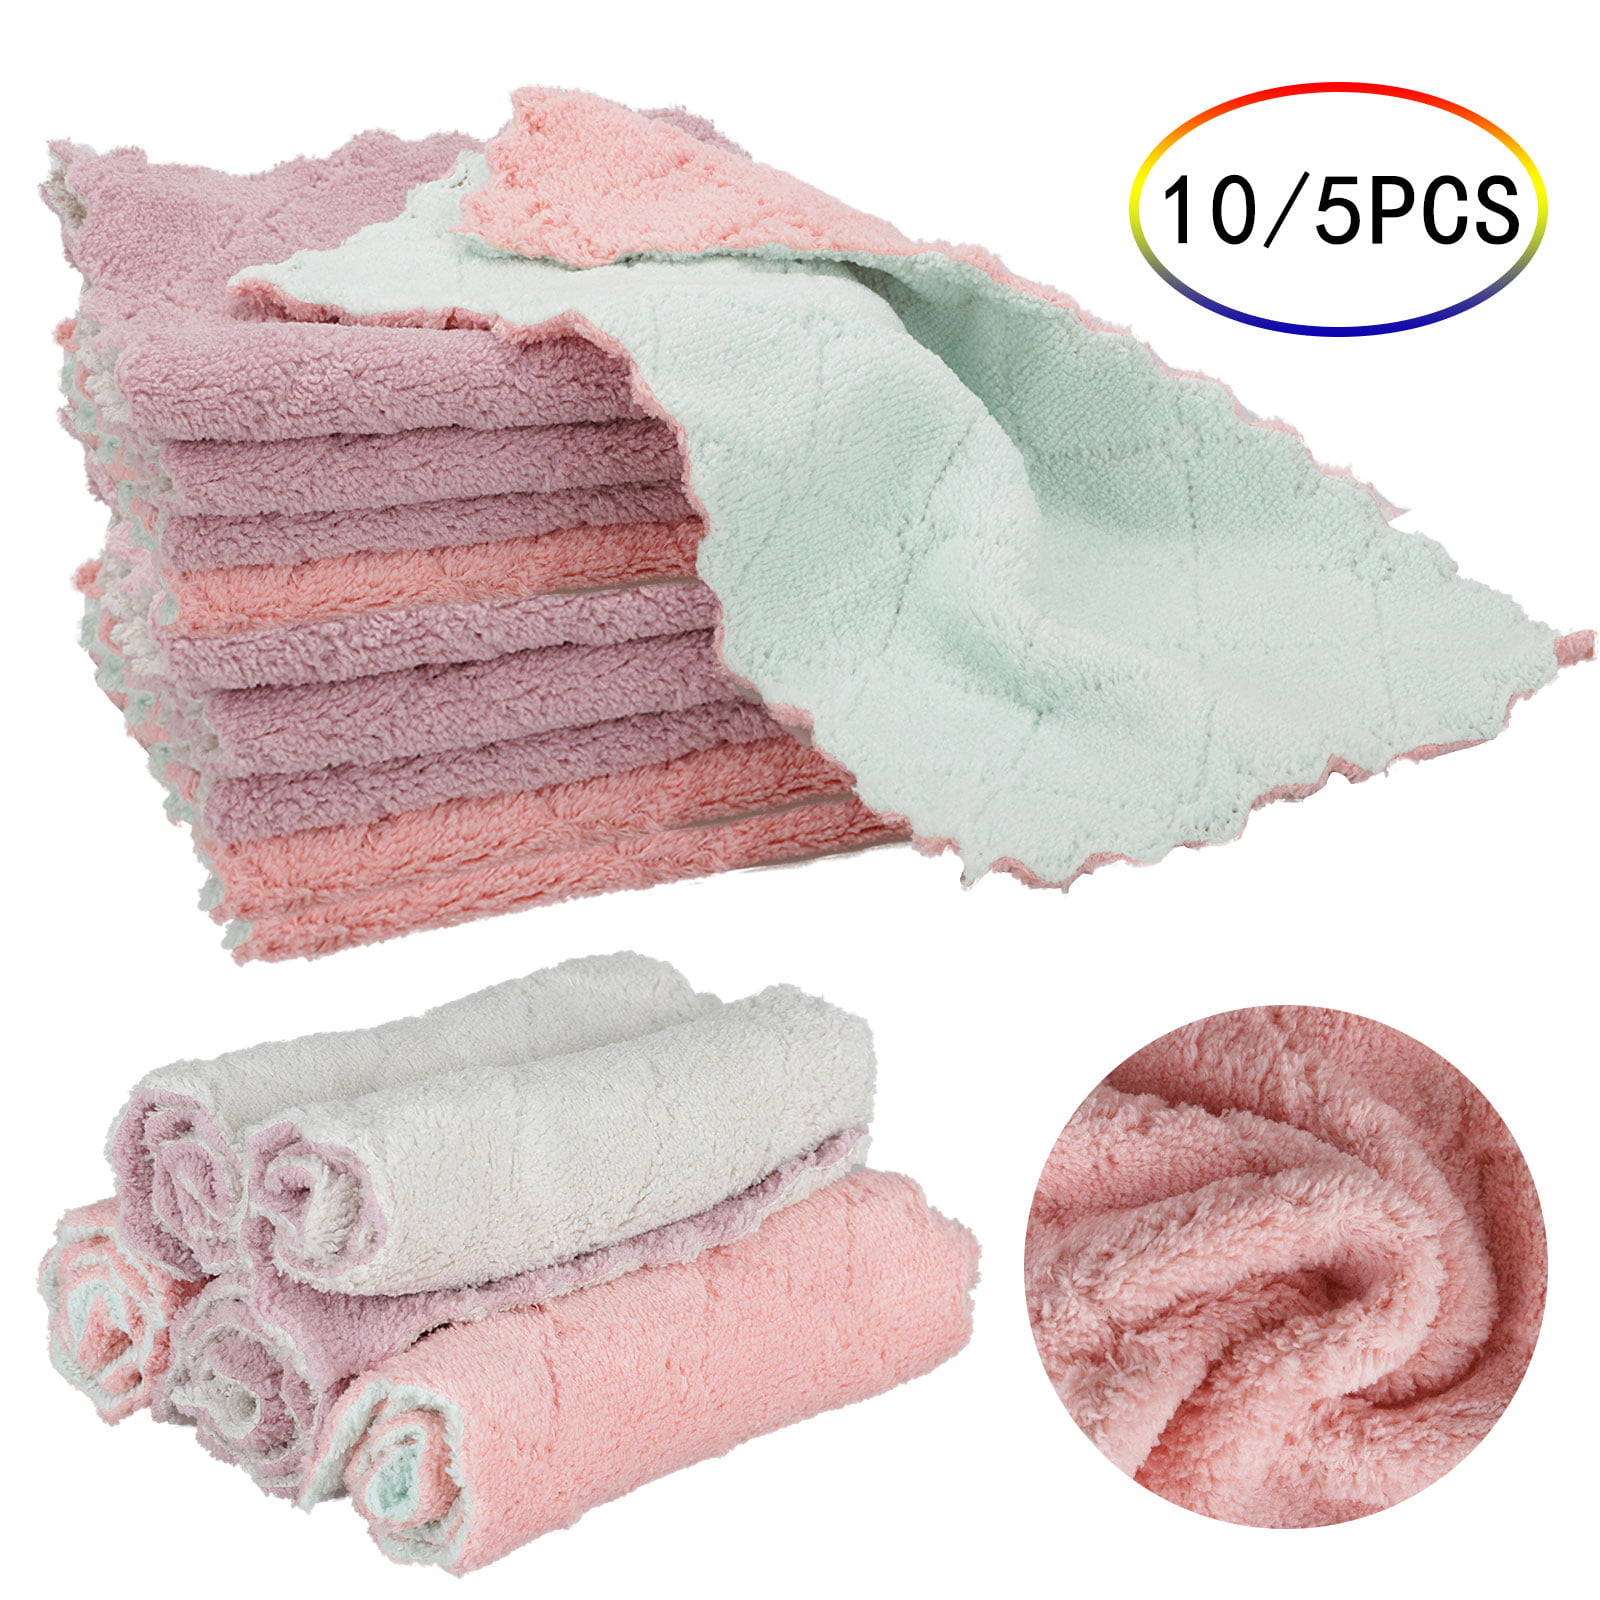 Cleaning Cloth Microfiber Kitchen Towels Wash Duster For Home Supplies 5pcs New 